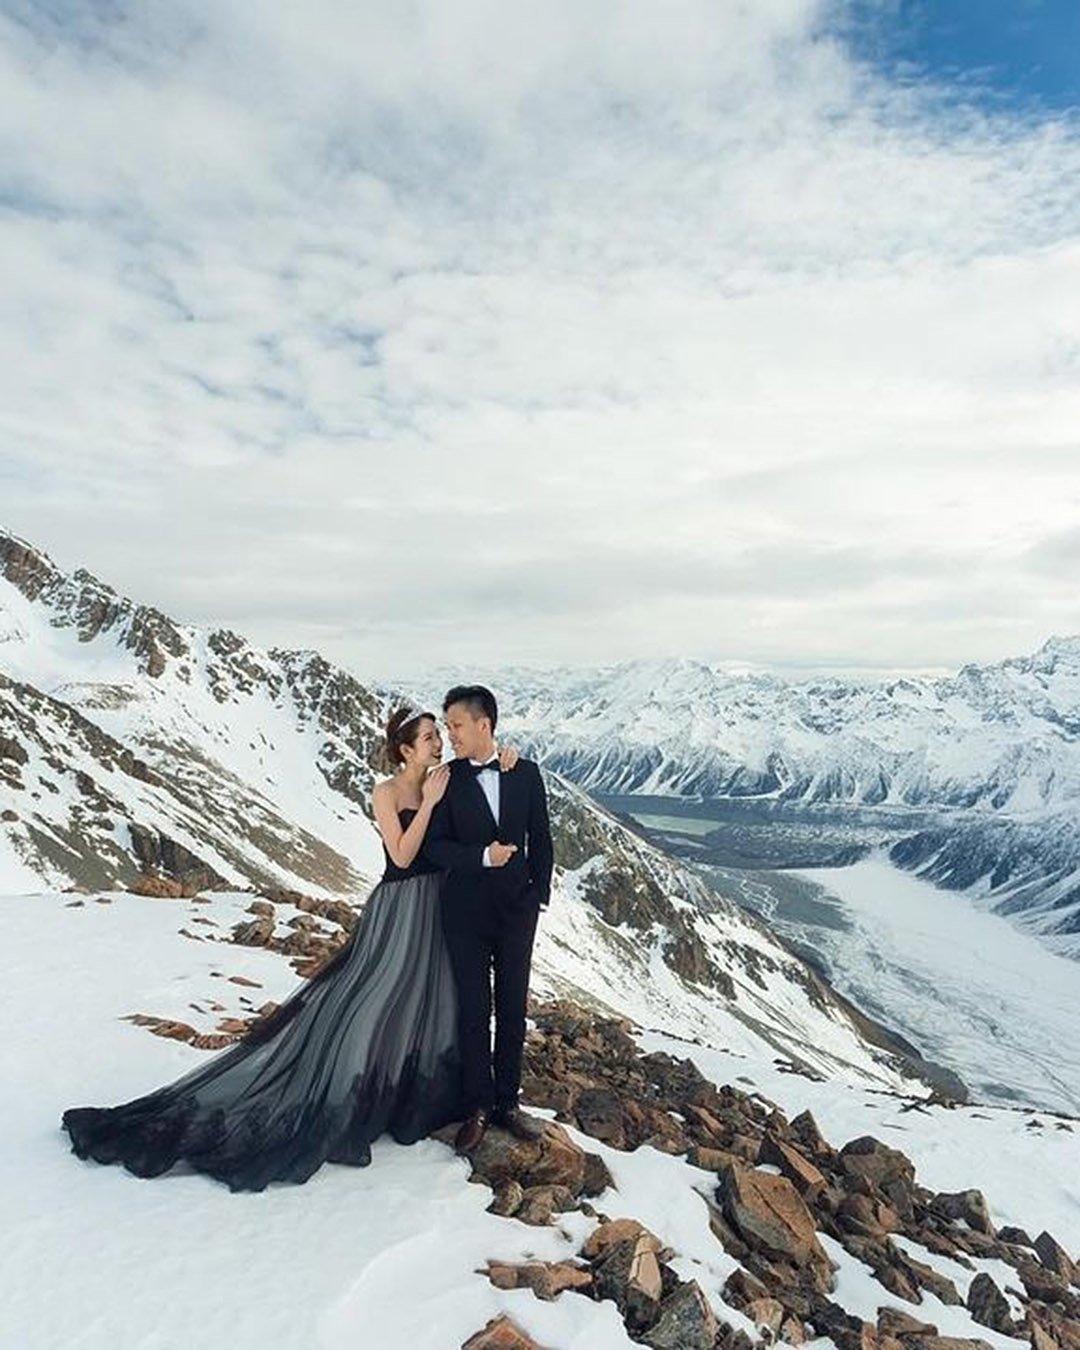 winter wedding photo ideas photo couple in front of mountains